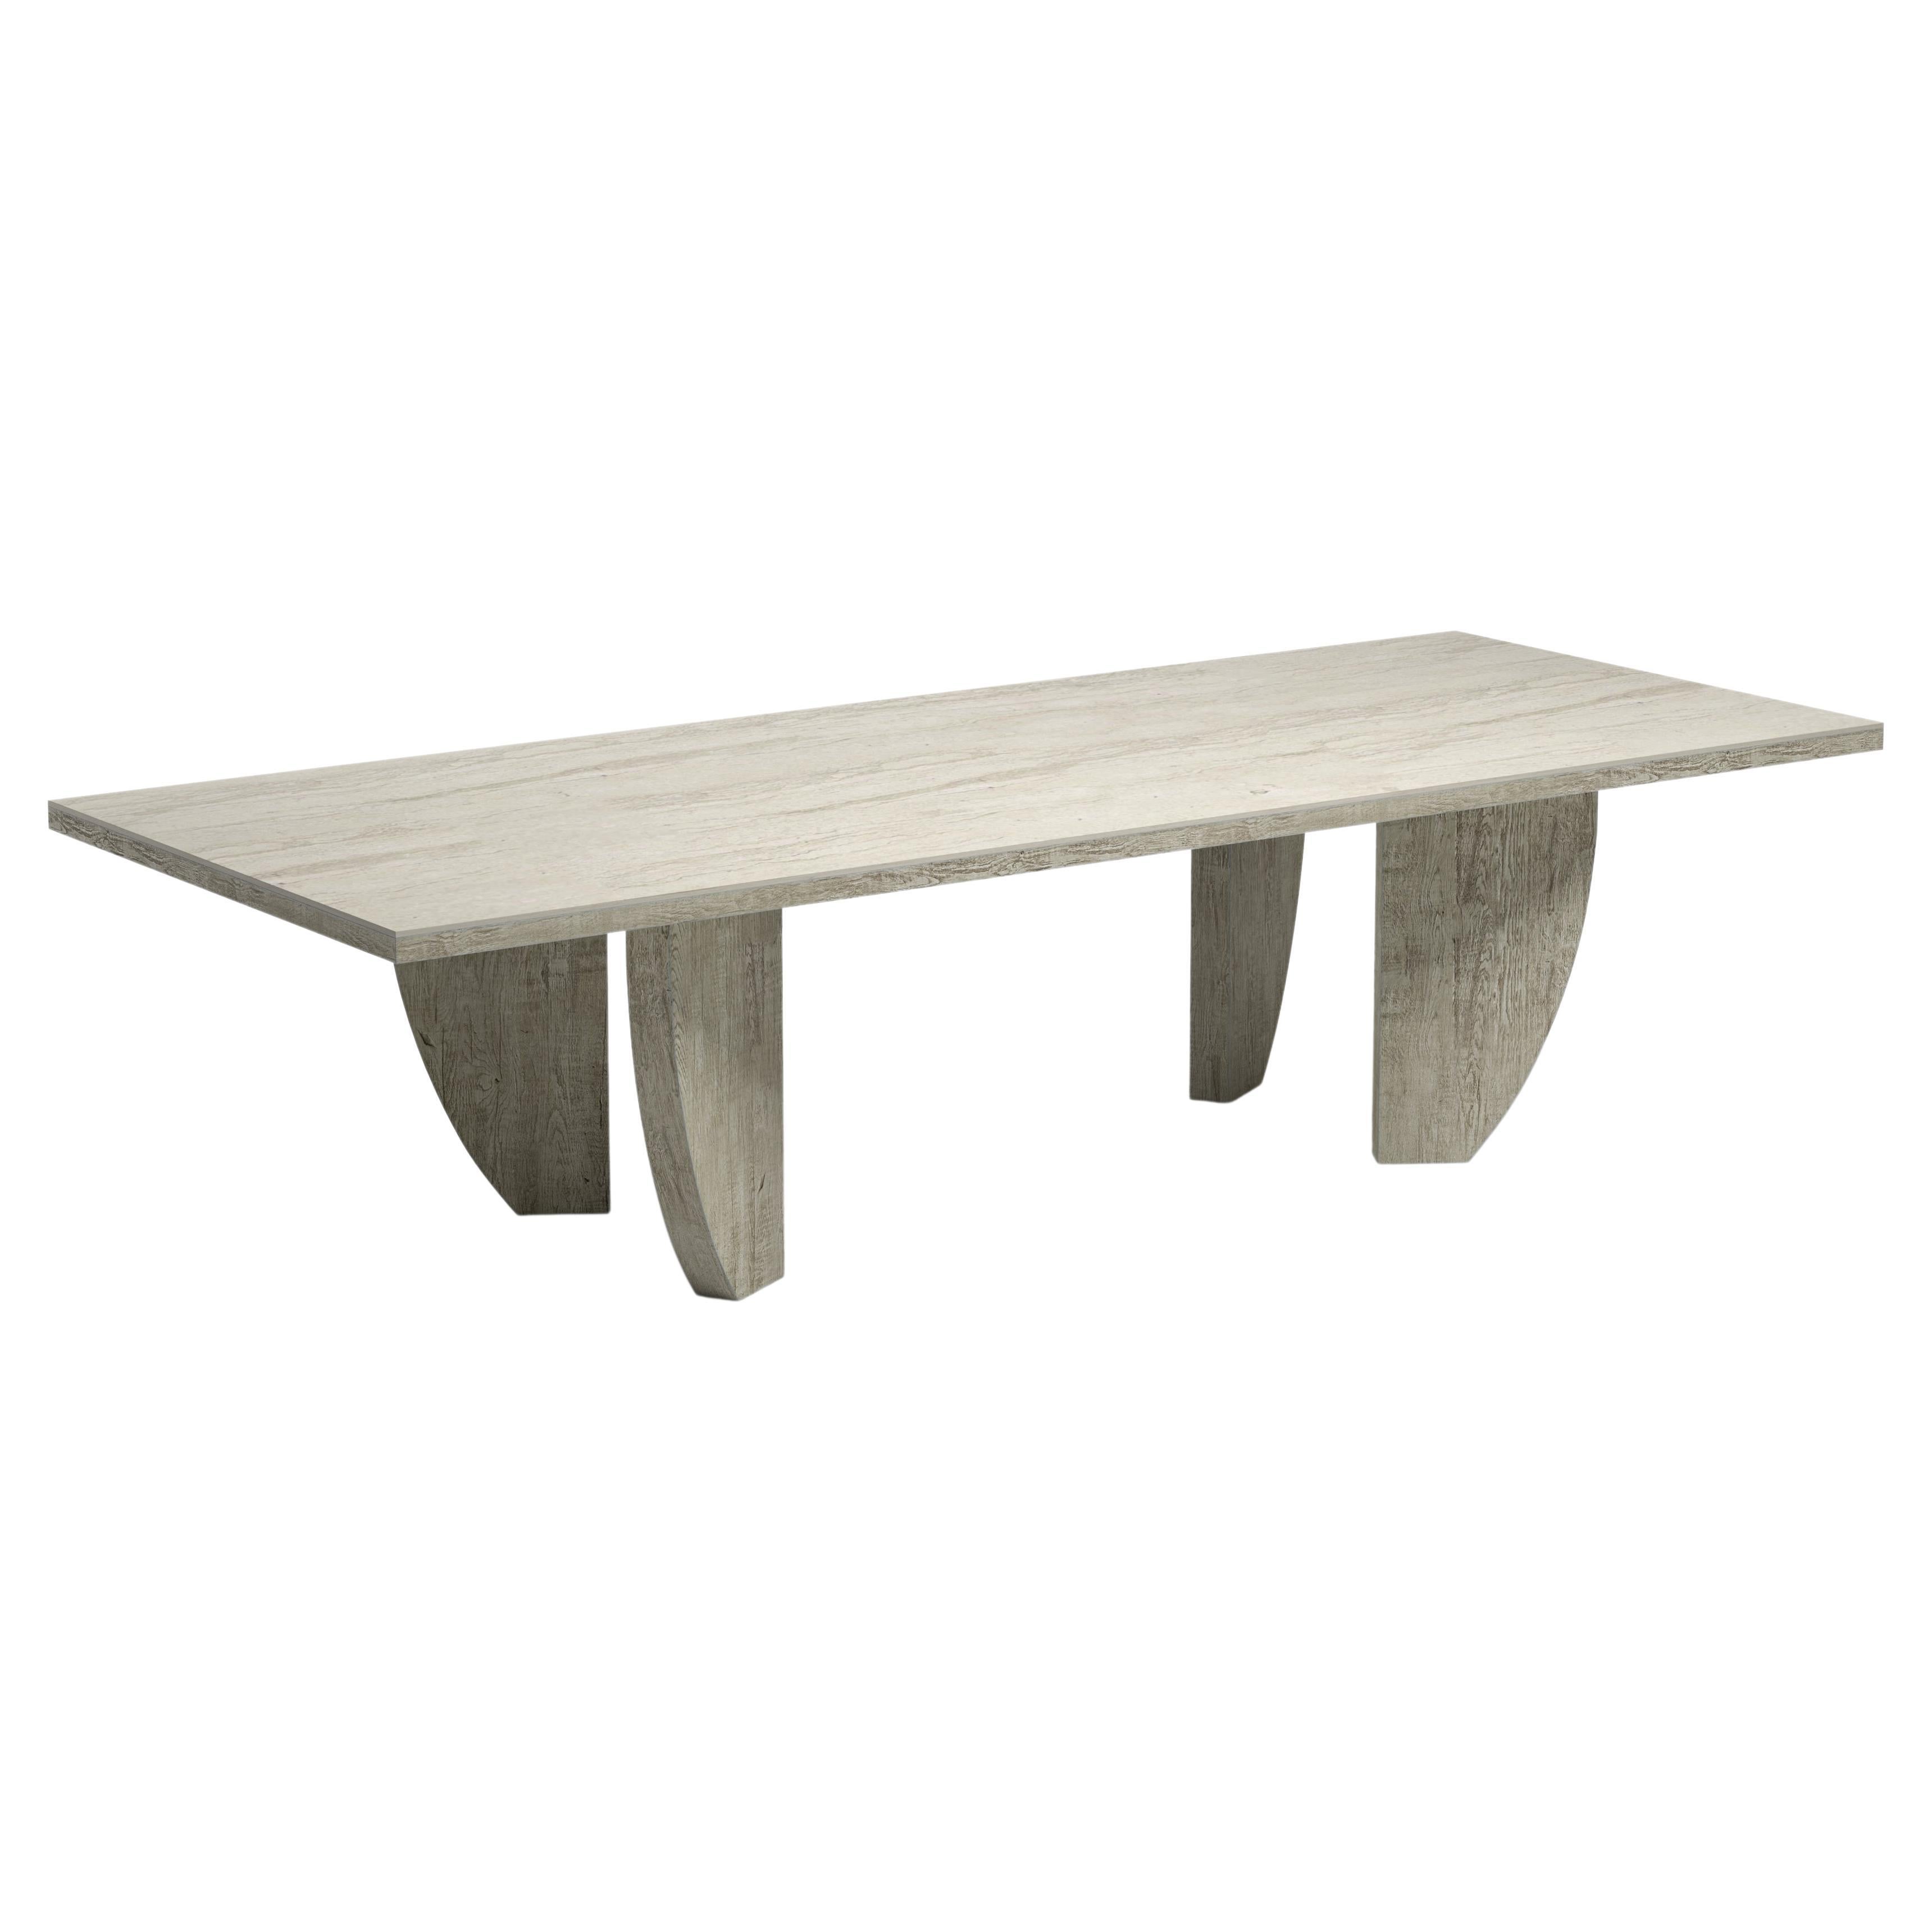 Ralph-ash Outdoor Dining Table by Snoc